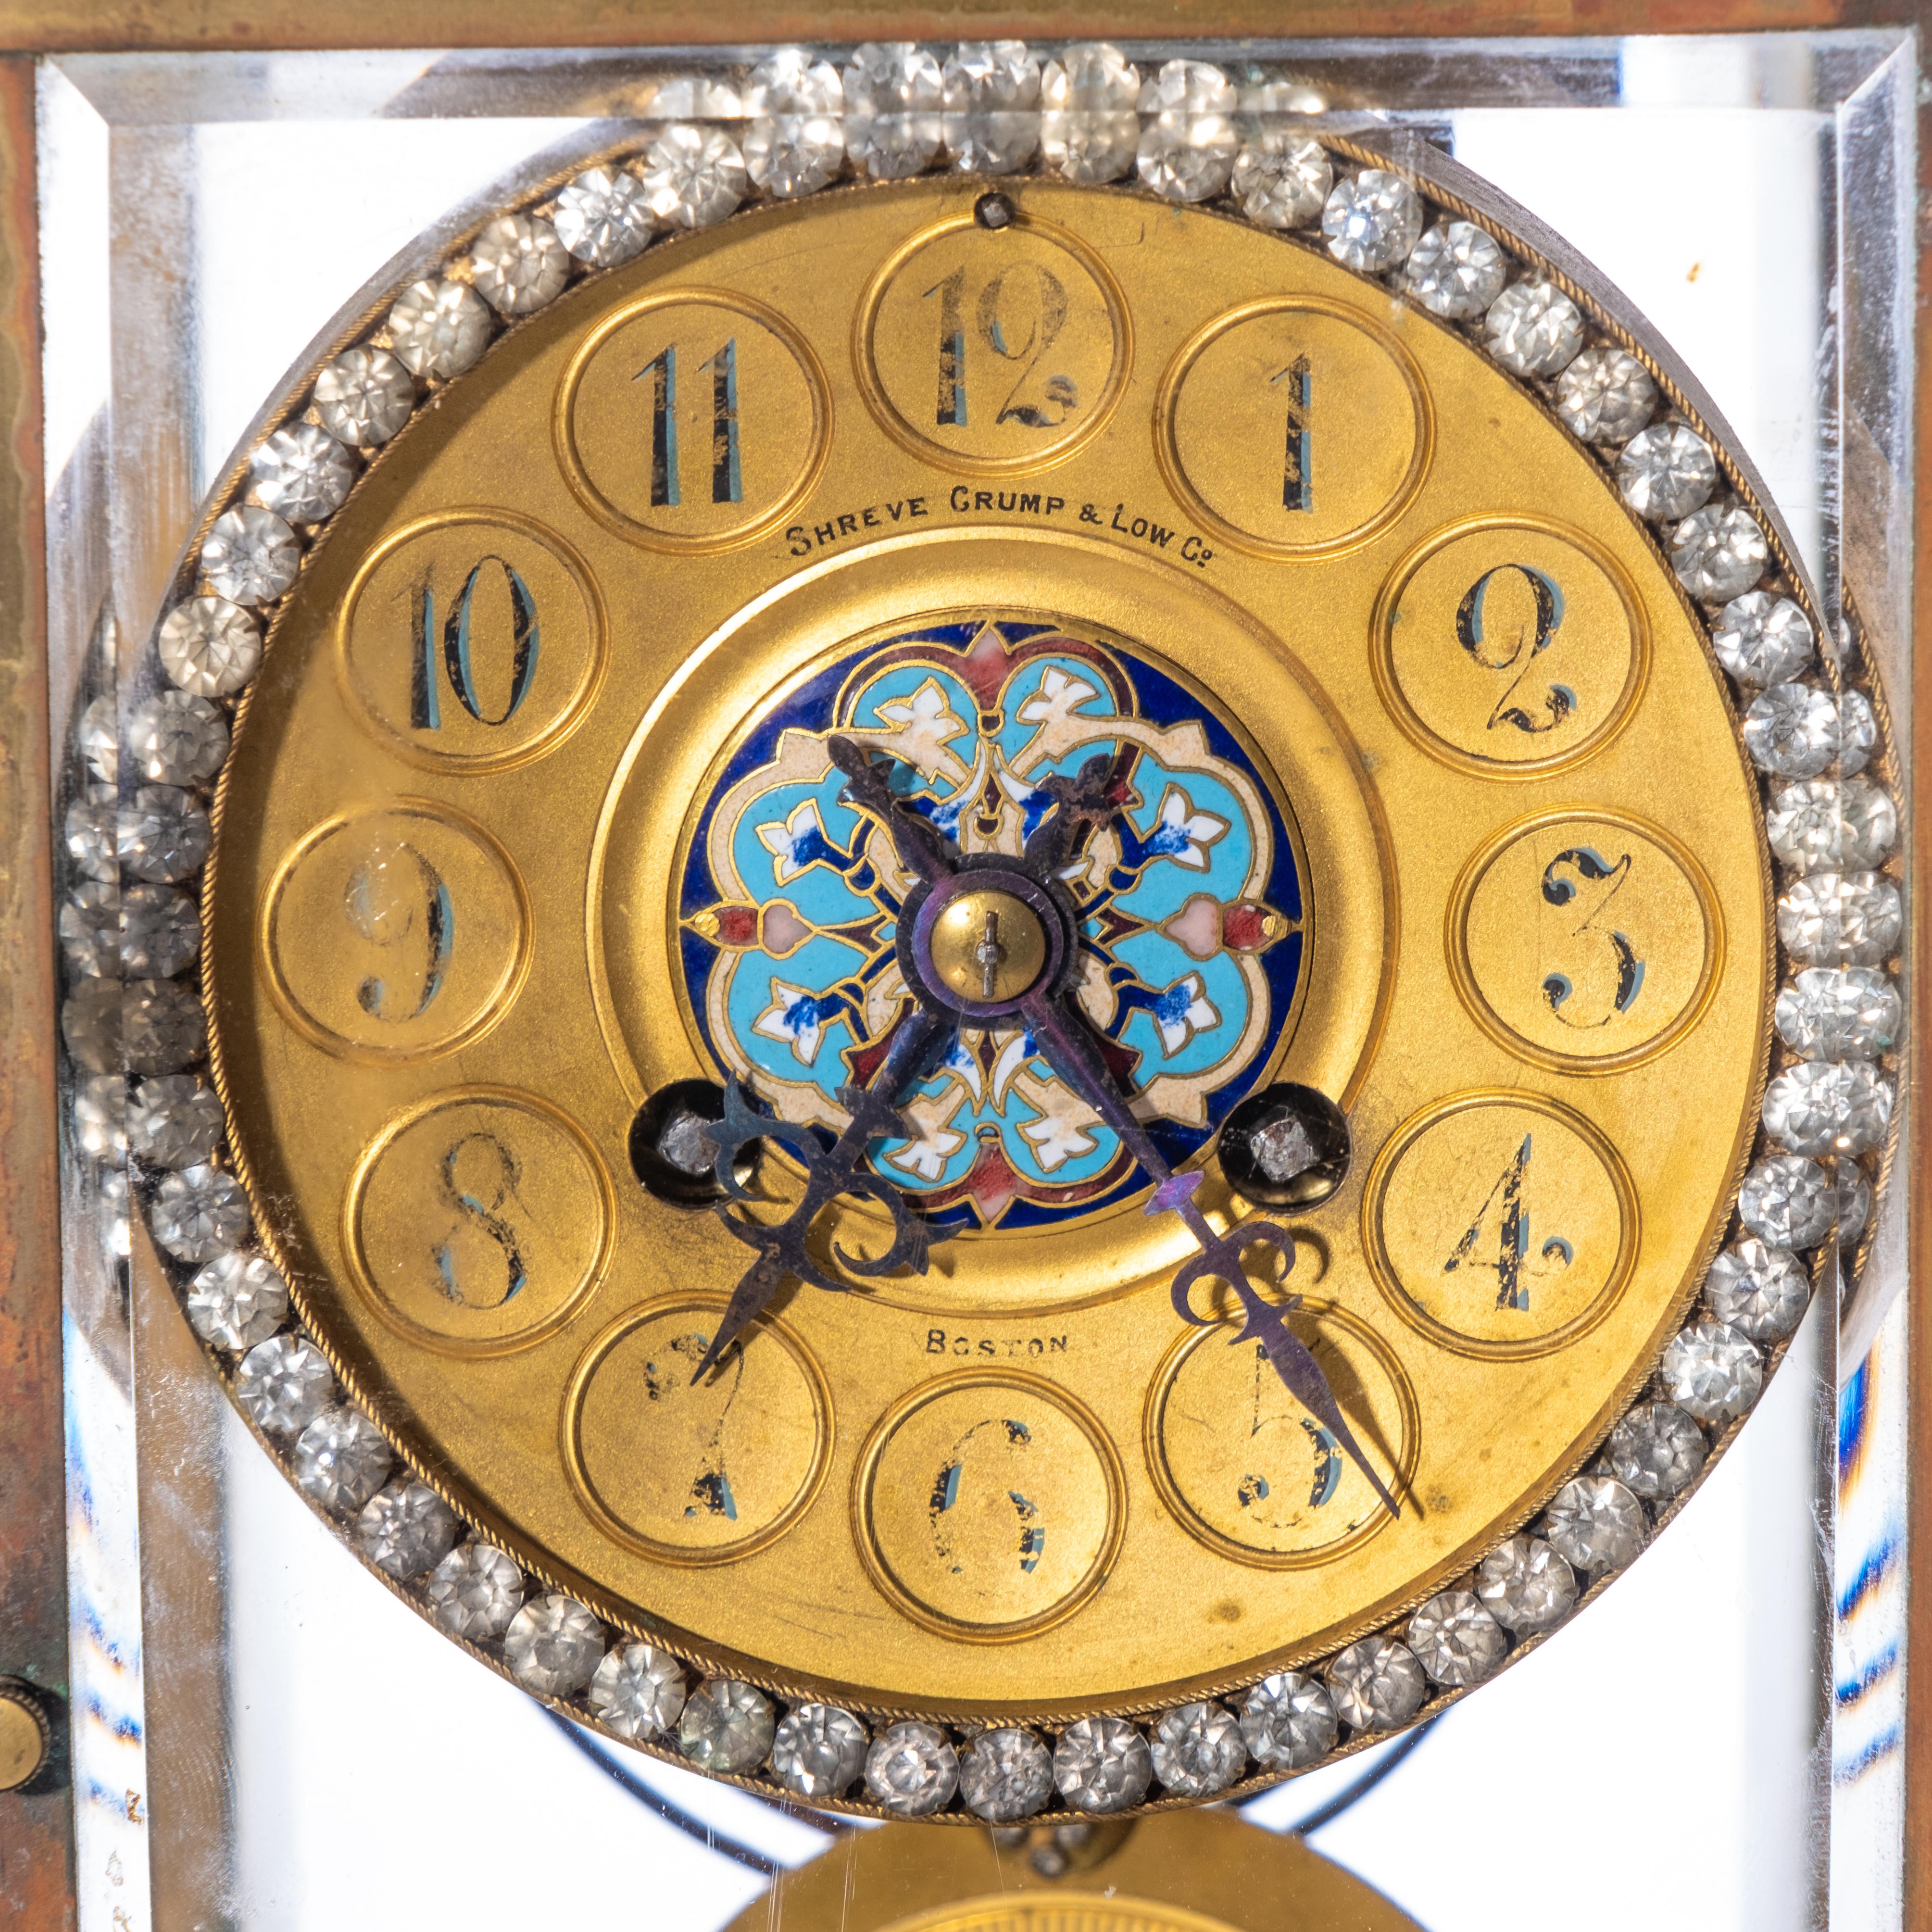 Gilt bronze and cloisonne crystal regulator mantel clock retailed by Shreve Crump & Low Co. with jewel decorated dial. circa 1900.